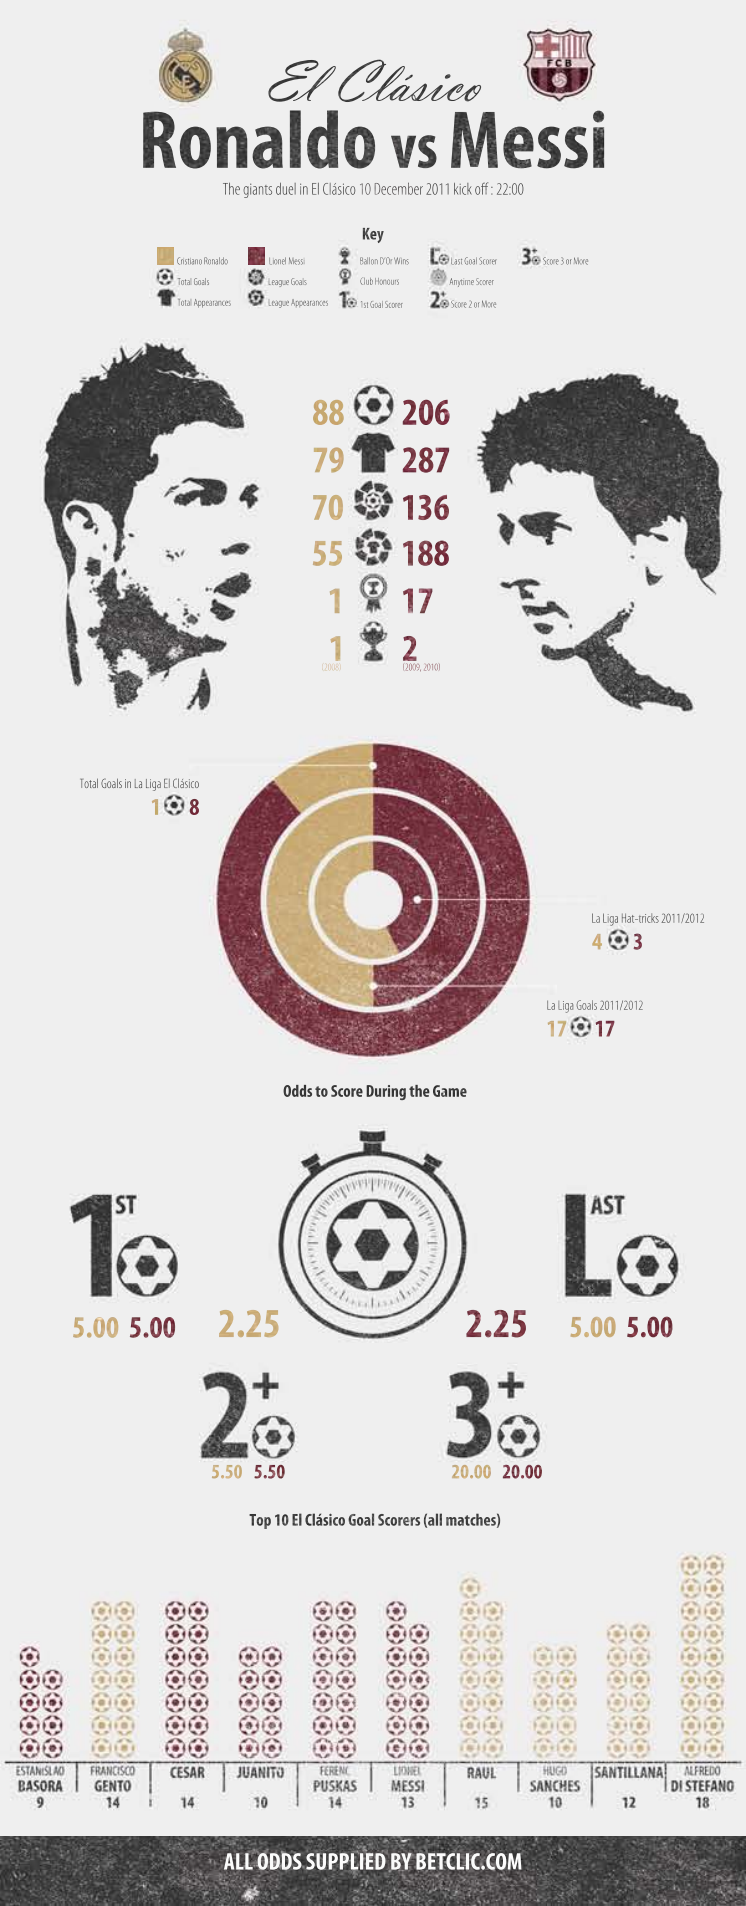 The stats, the odds: Ronaldo vs Messi info-graphics ahead of El Clasico